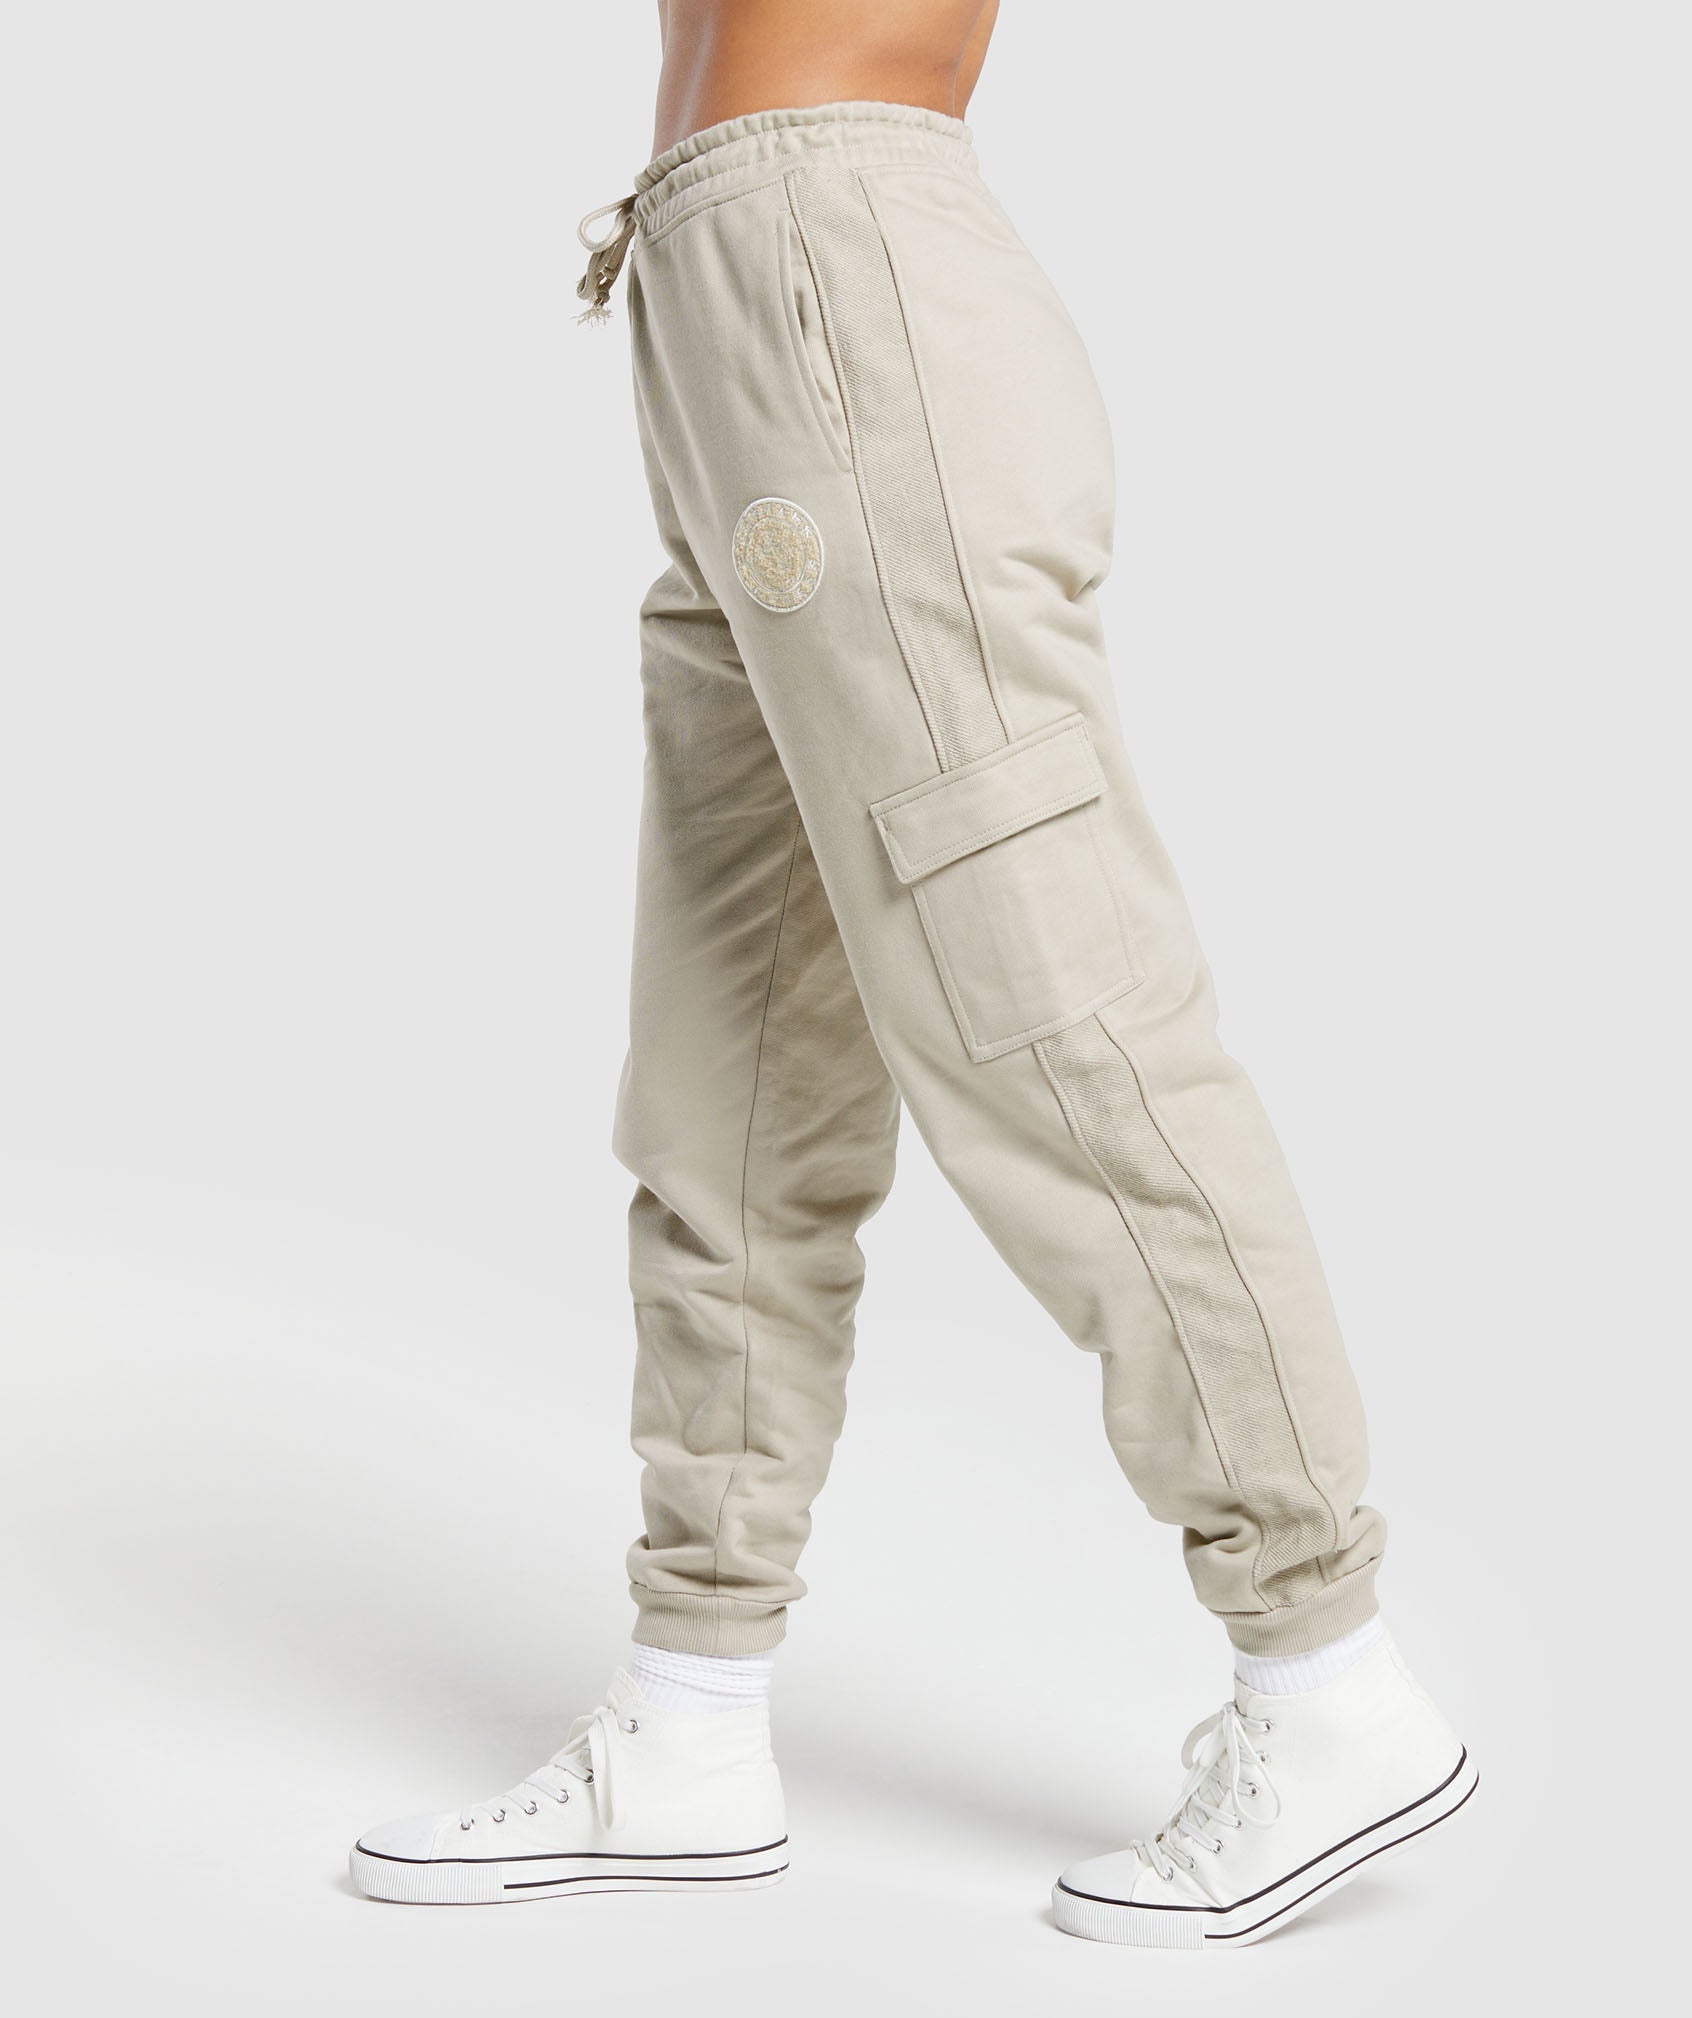 Gymshark Recess Joggers - Cream NEW! S size GYMSHARK DOES NOT